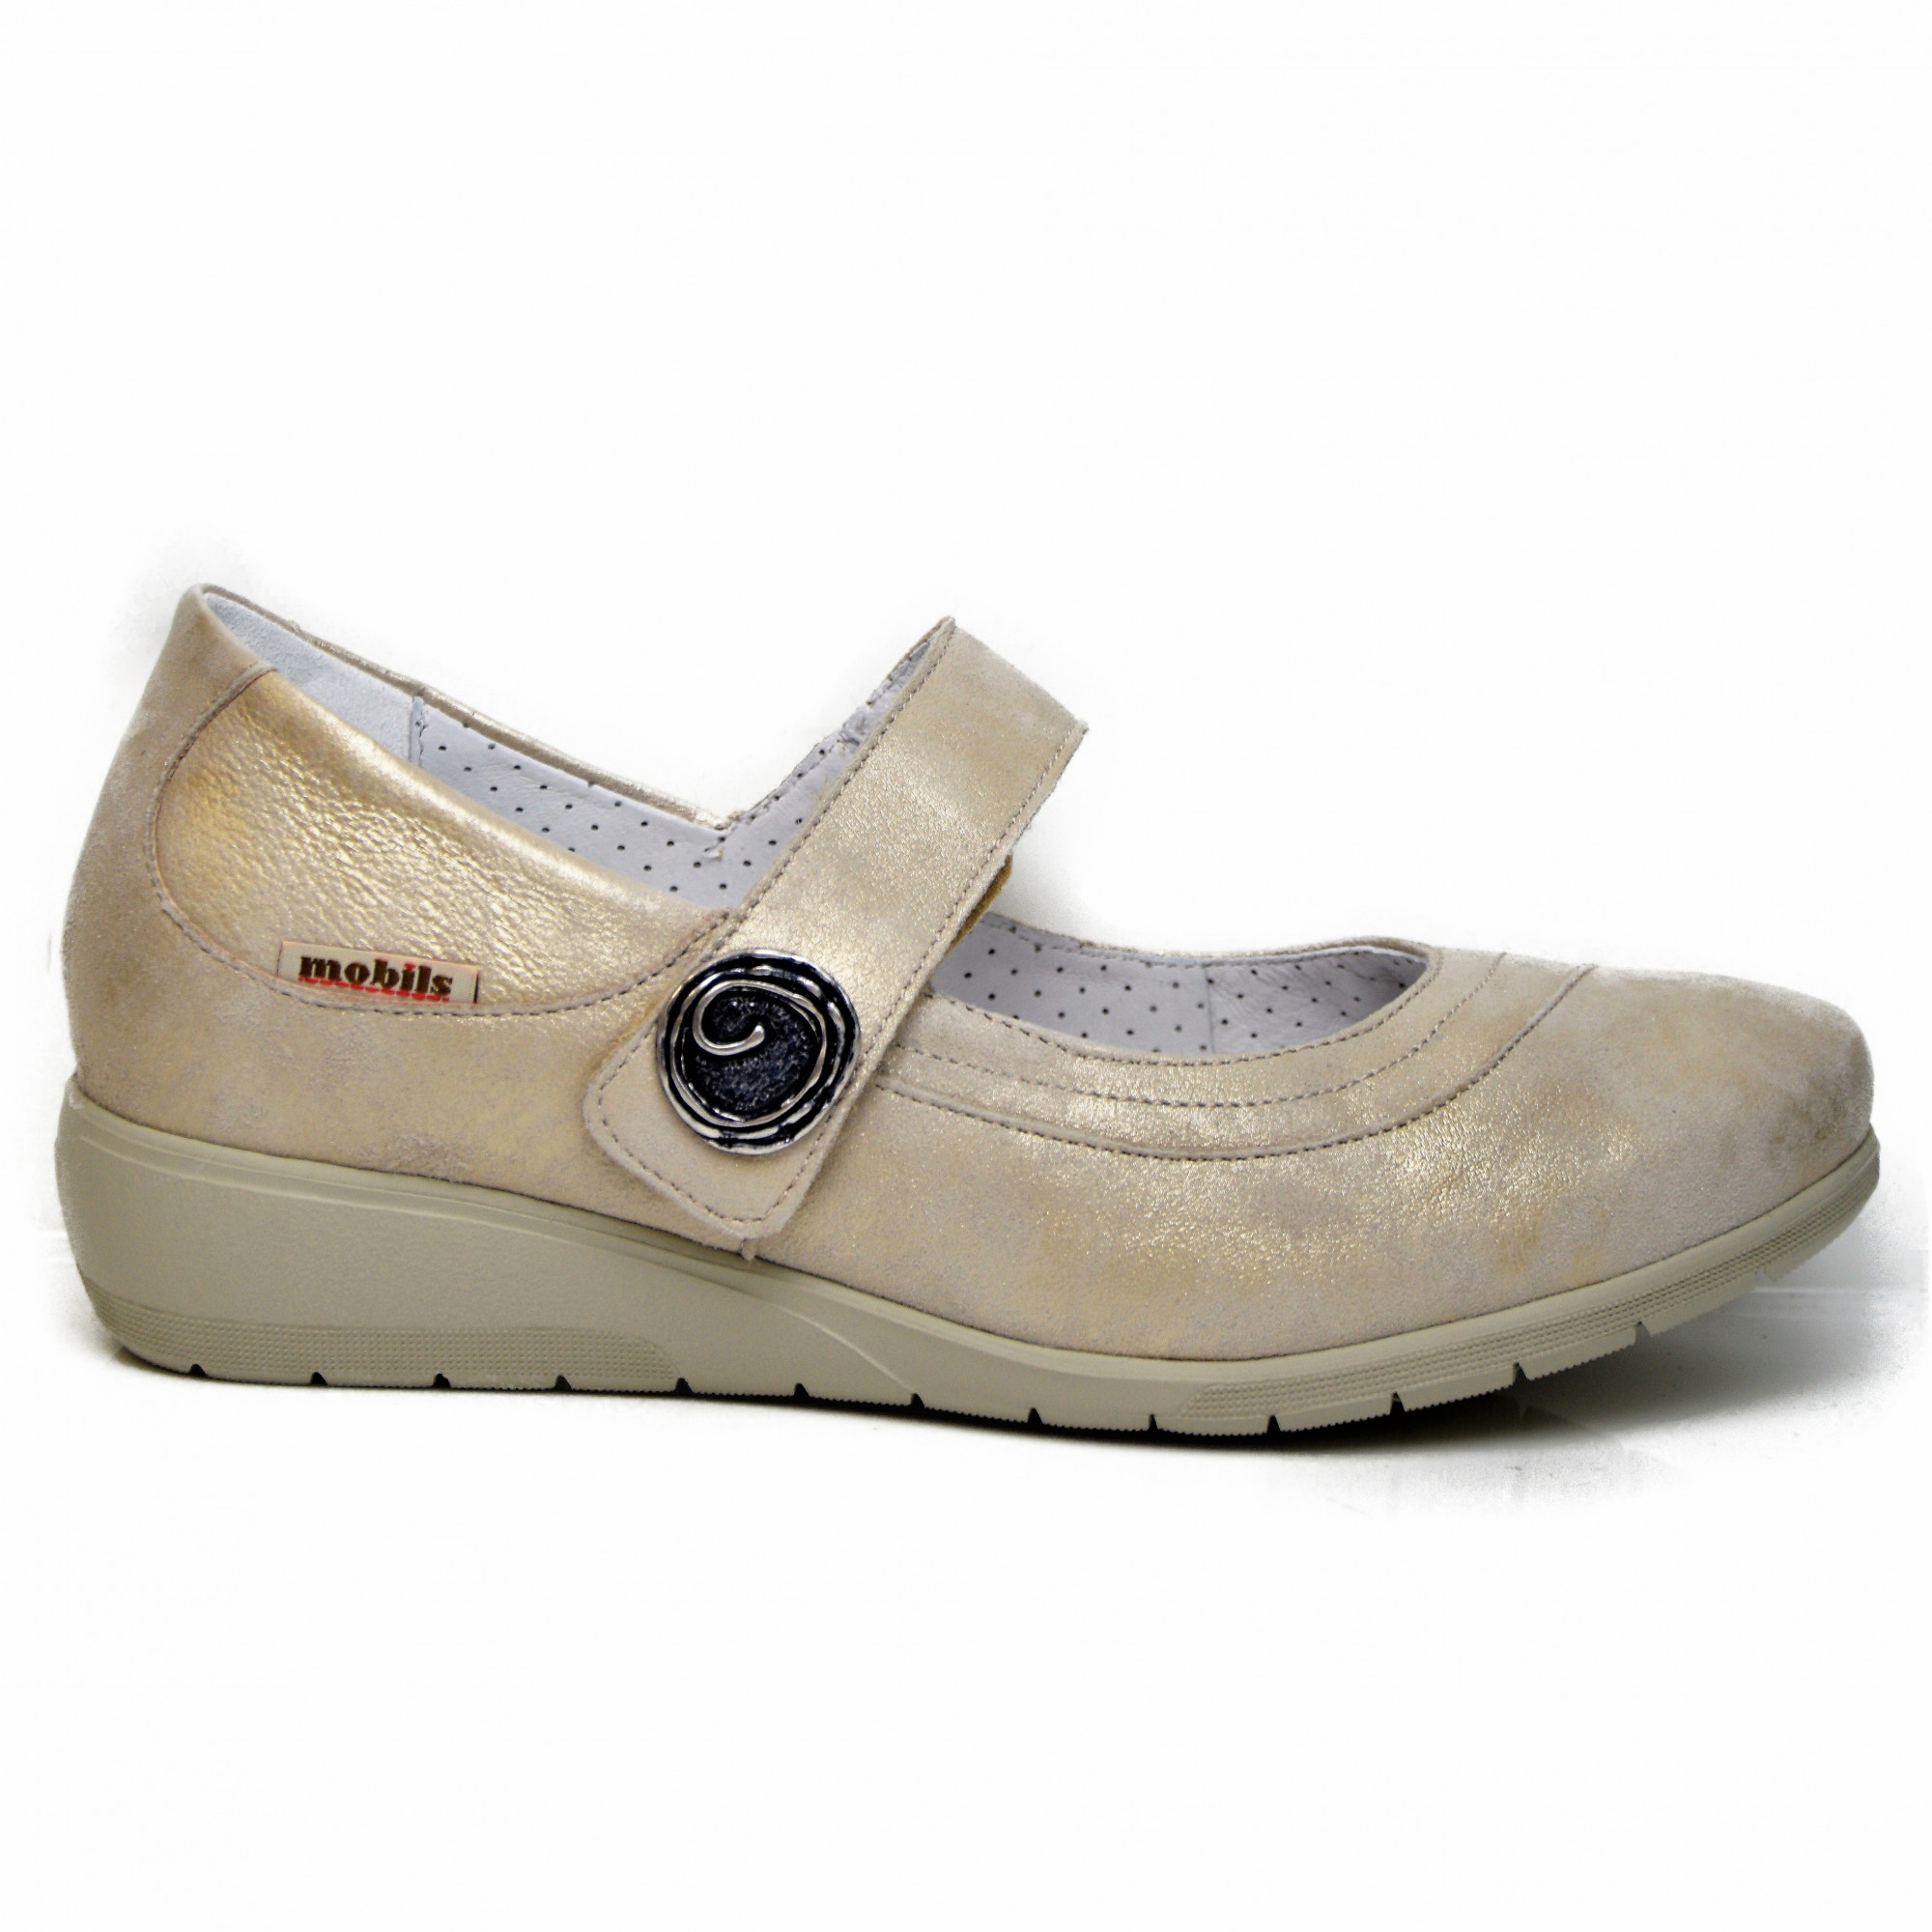 MOBILS BY MEPHISTO JESSY WOMEN'S SHOES MARY JANE STYLE | SanitariaWeb